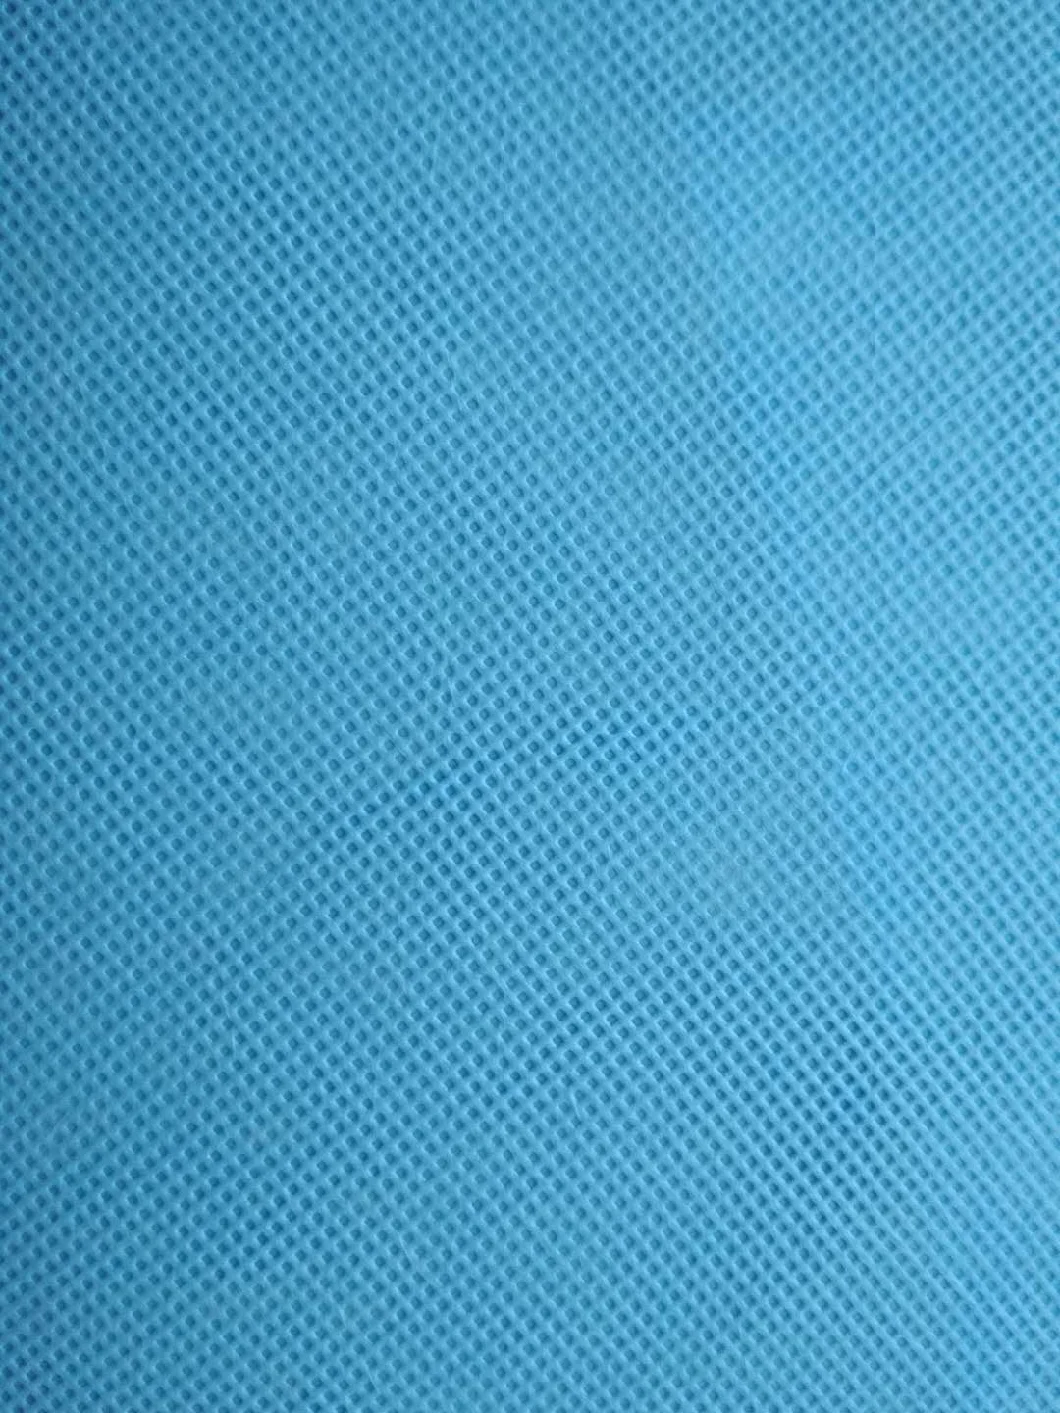 100% Polyester/ Spunbonded Nonwoven Fabric for Industrial and Agriculture